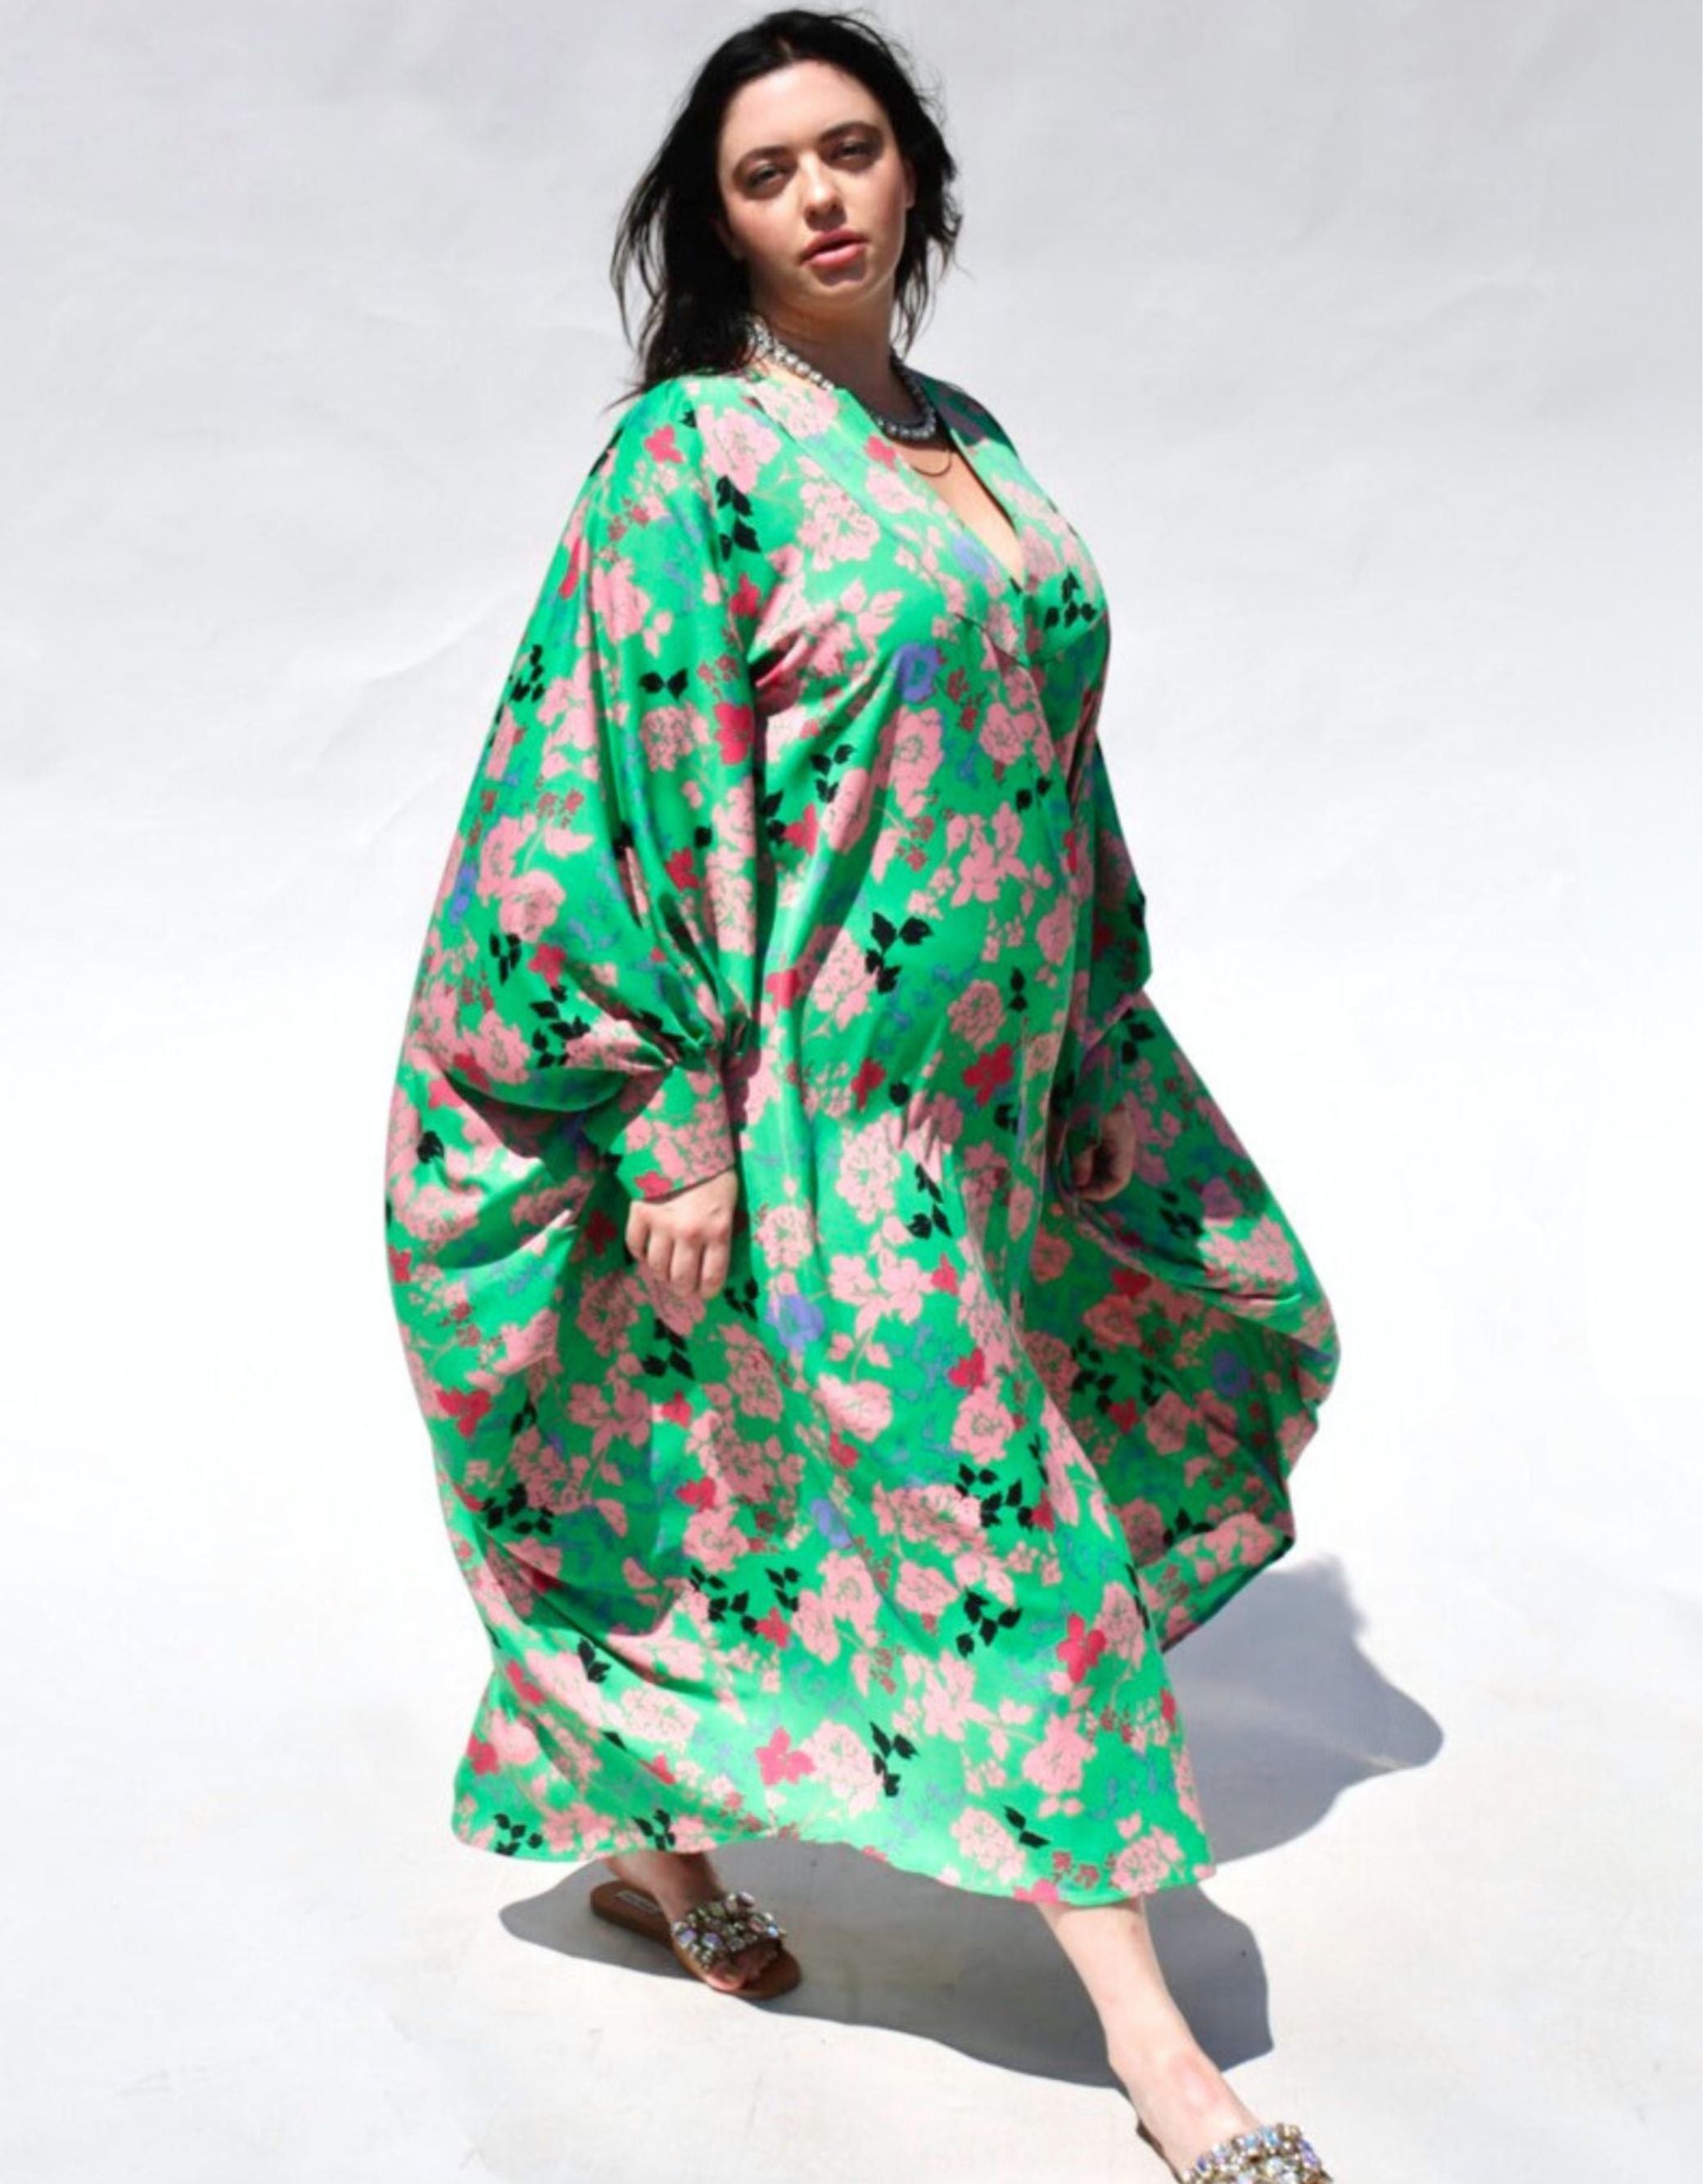 The Trapunto Kaftan- Maxi length is our newest Kaftan style.  This is our most lux in styling and shape to date.  With a full drape of fabric that gathers into the wide beautiful cuffs. The cuffs and front yolk feature the multi-rows of trapunto stitch